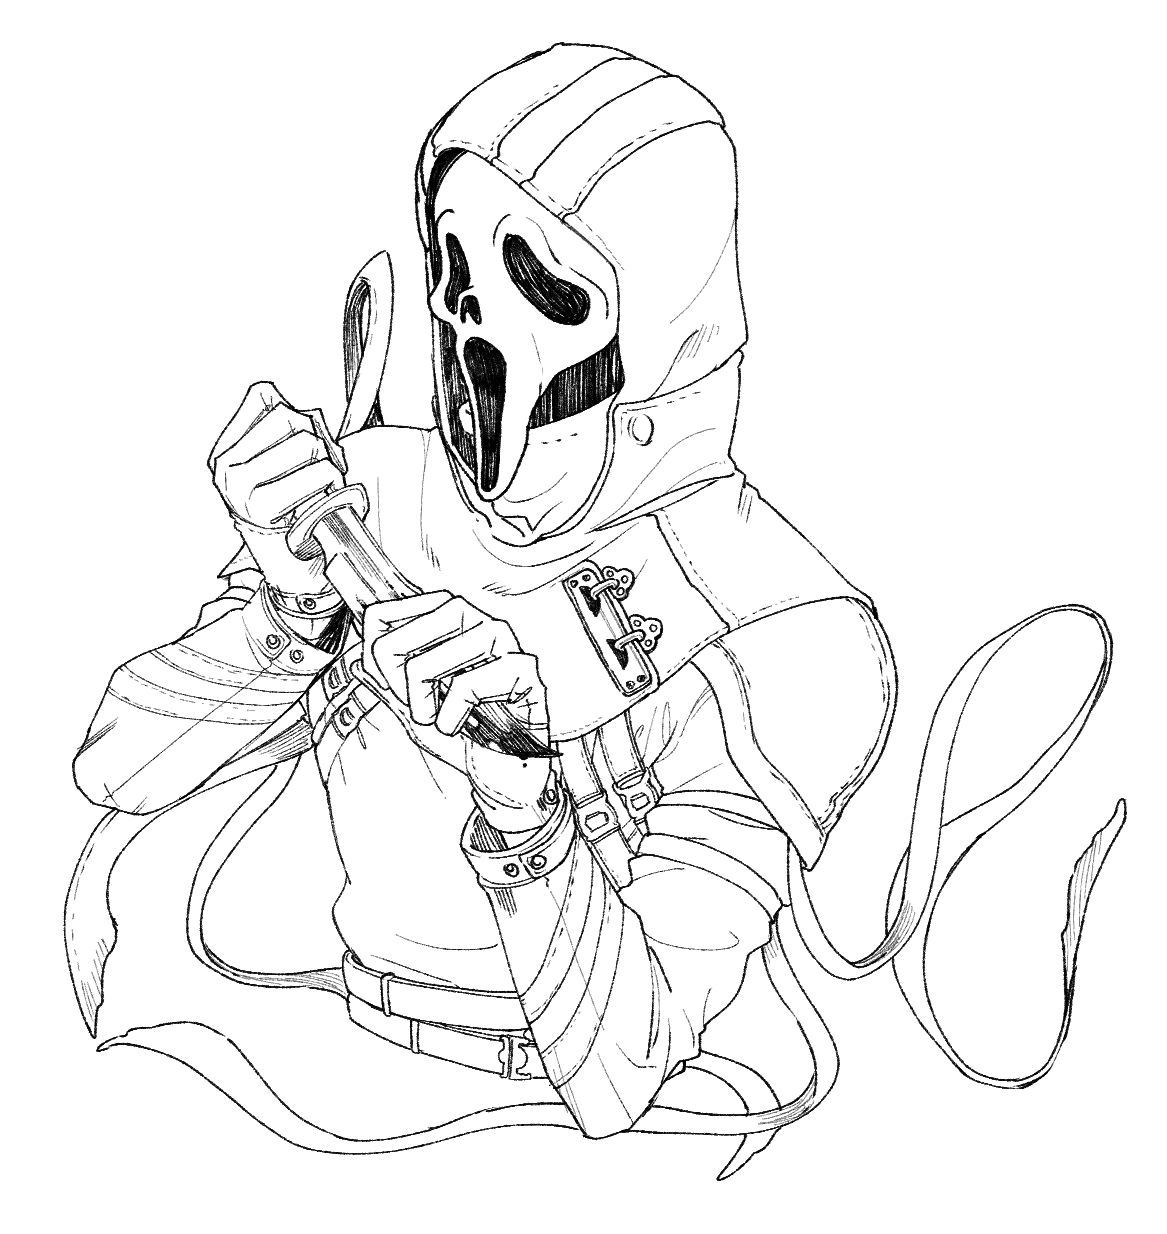 Ghostface Scream Sketch Coloring Page